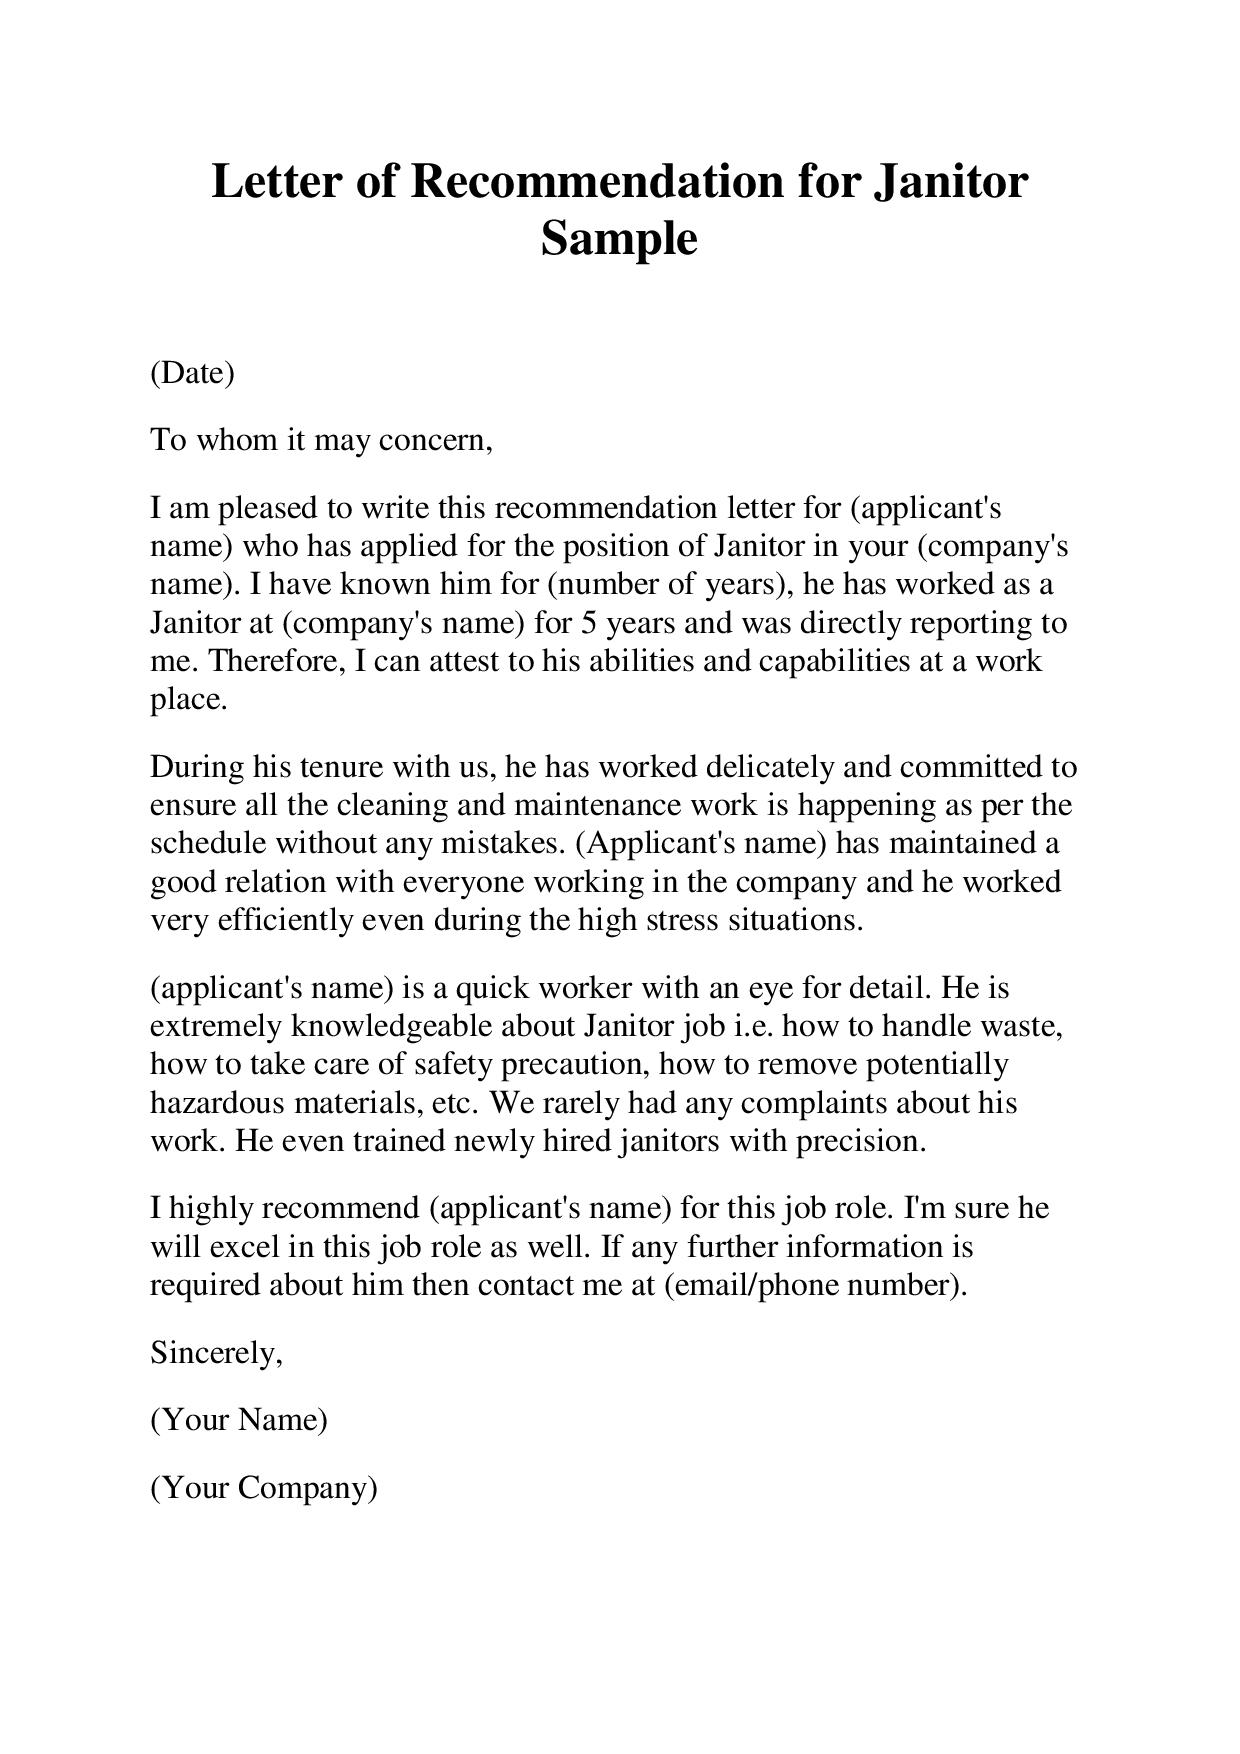 Janitor Letter of Recommendation Sample & Example